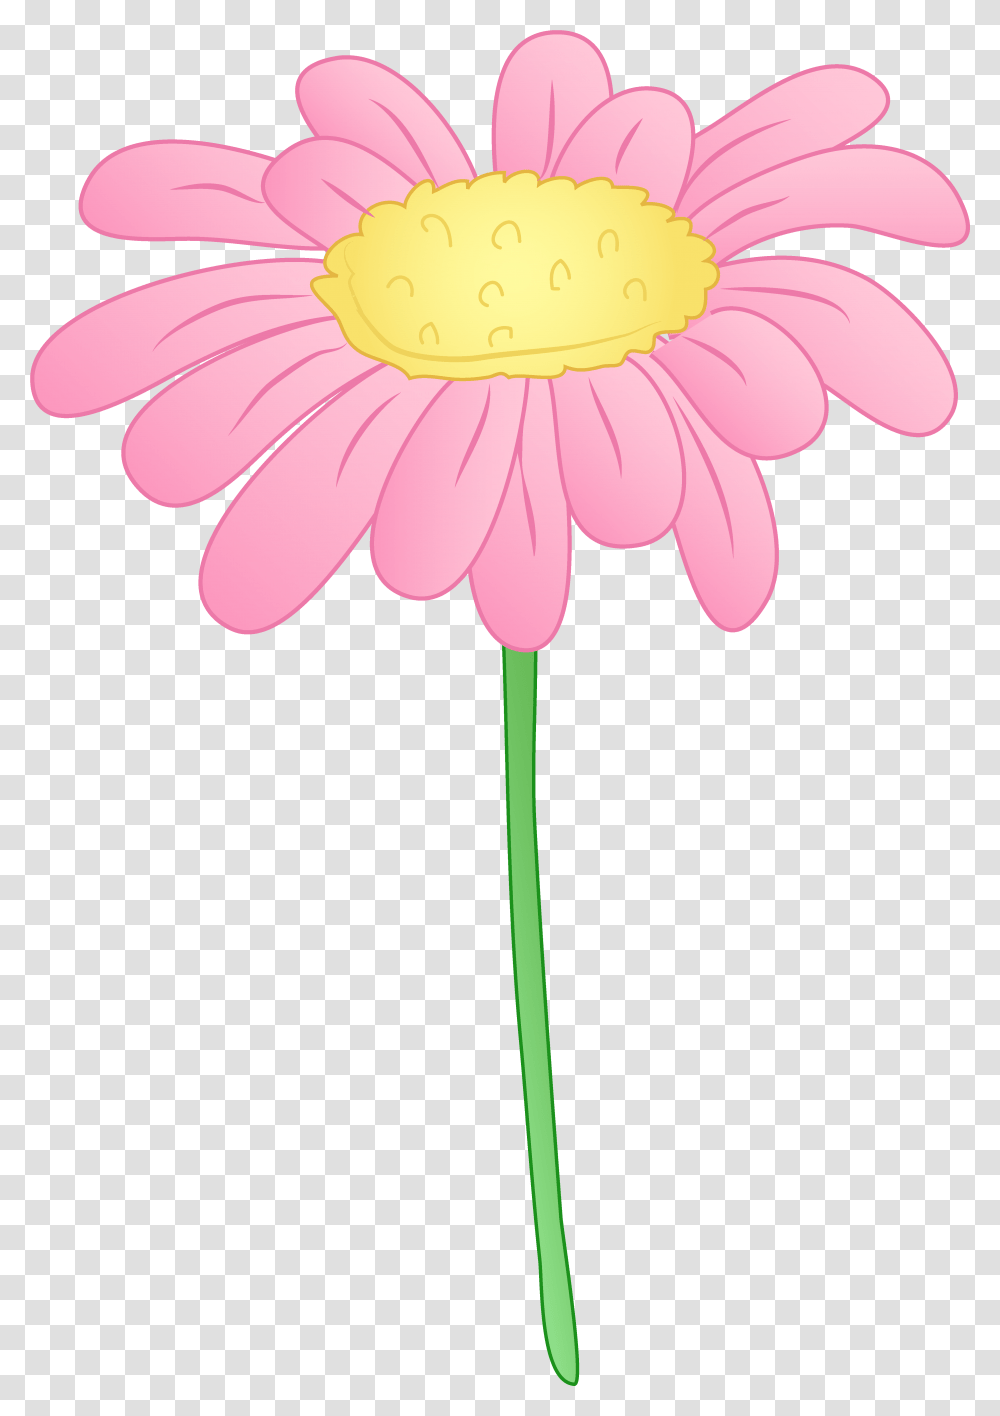 Library Of Flower Cartoon Free Files Cartoon Image Single Flowers, Plant, Daisy, Daisies, Blossom Transparent Png